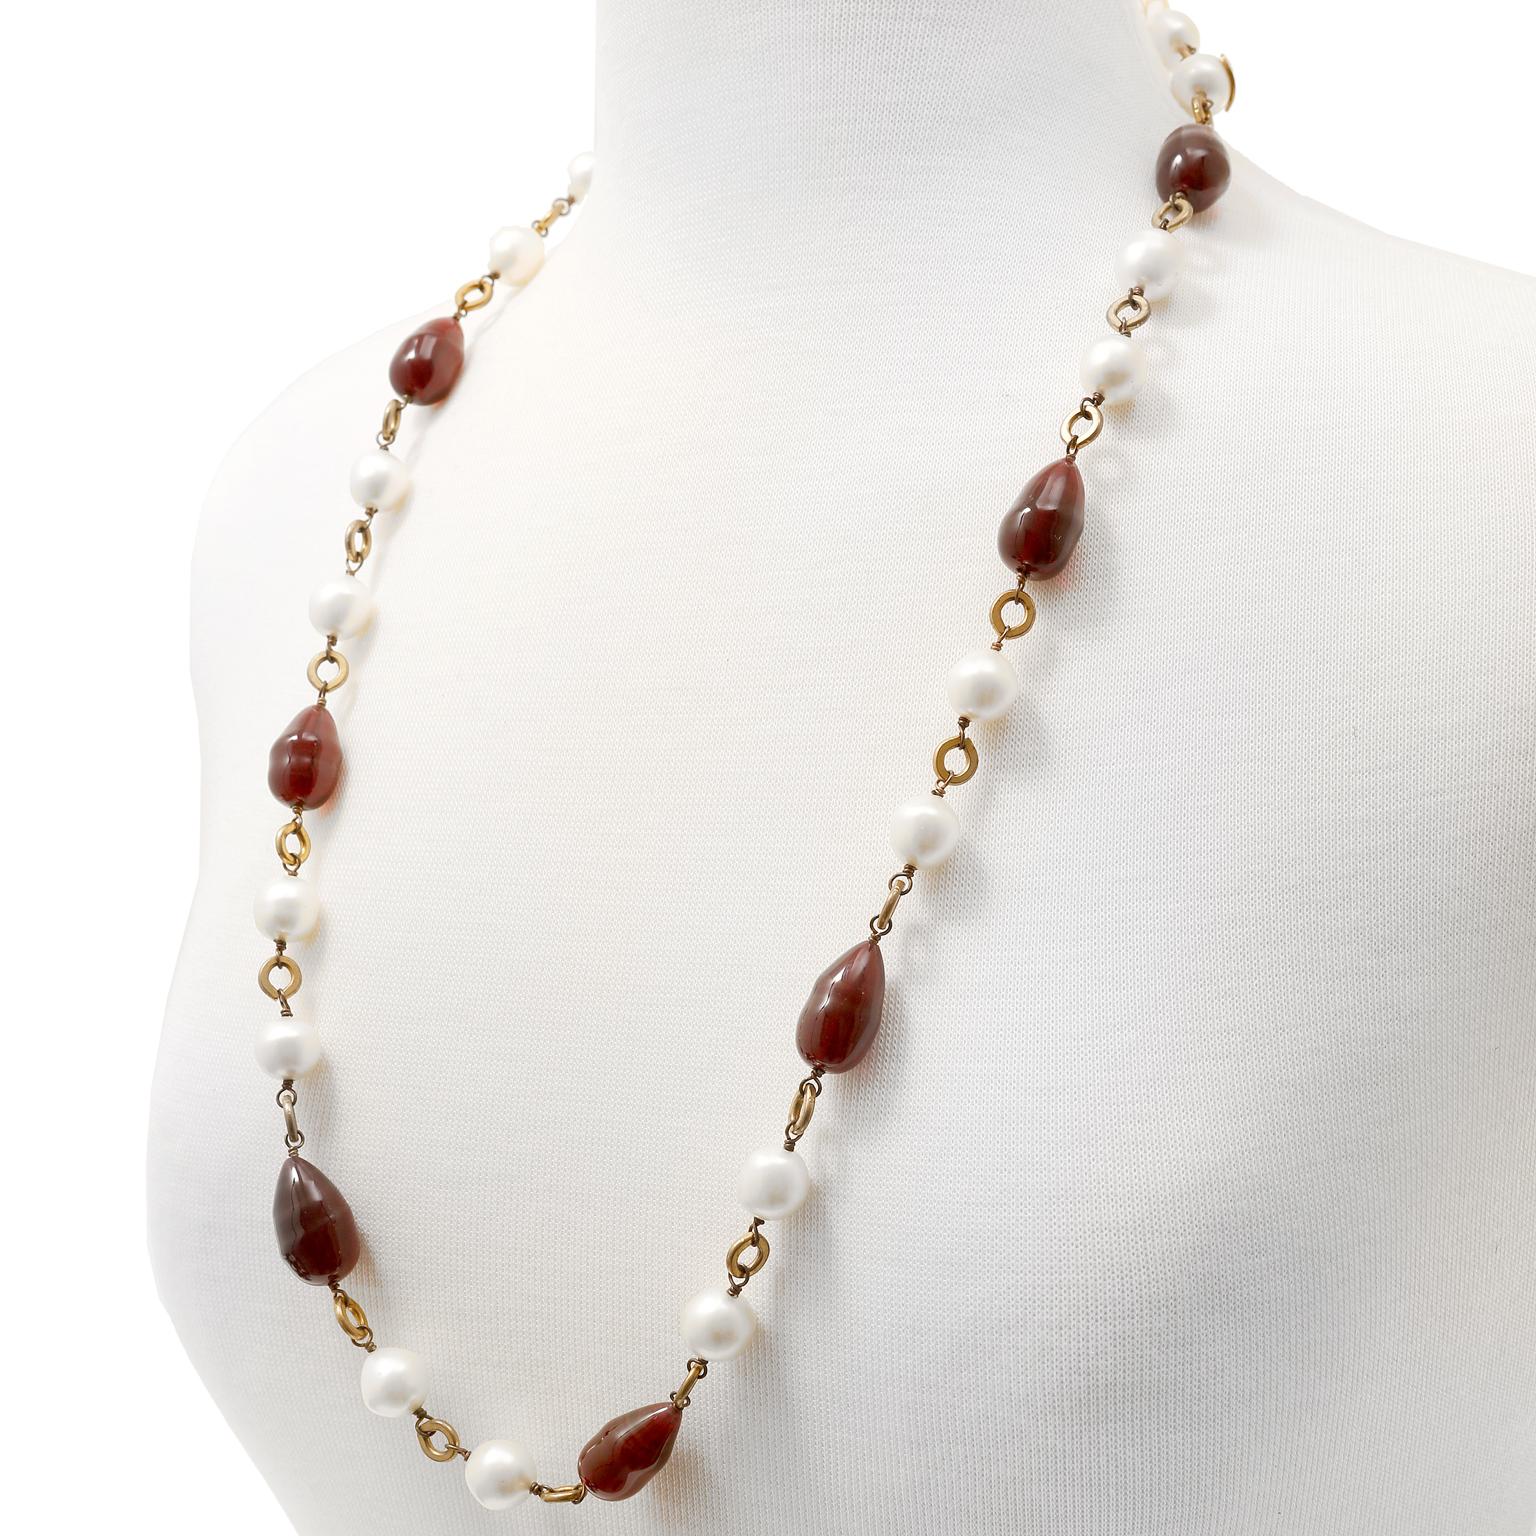 This authentic Chanel Red Gripoix and Pearl Sautoir Necklace is in excellent vintage condition from the 1980's.  Deep red raindrop shaped Gripoix glass beads alternate with faux pearls on a long gold chain.  Approximately 31 inches end to end. 